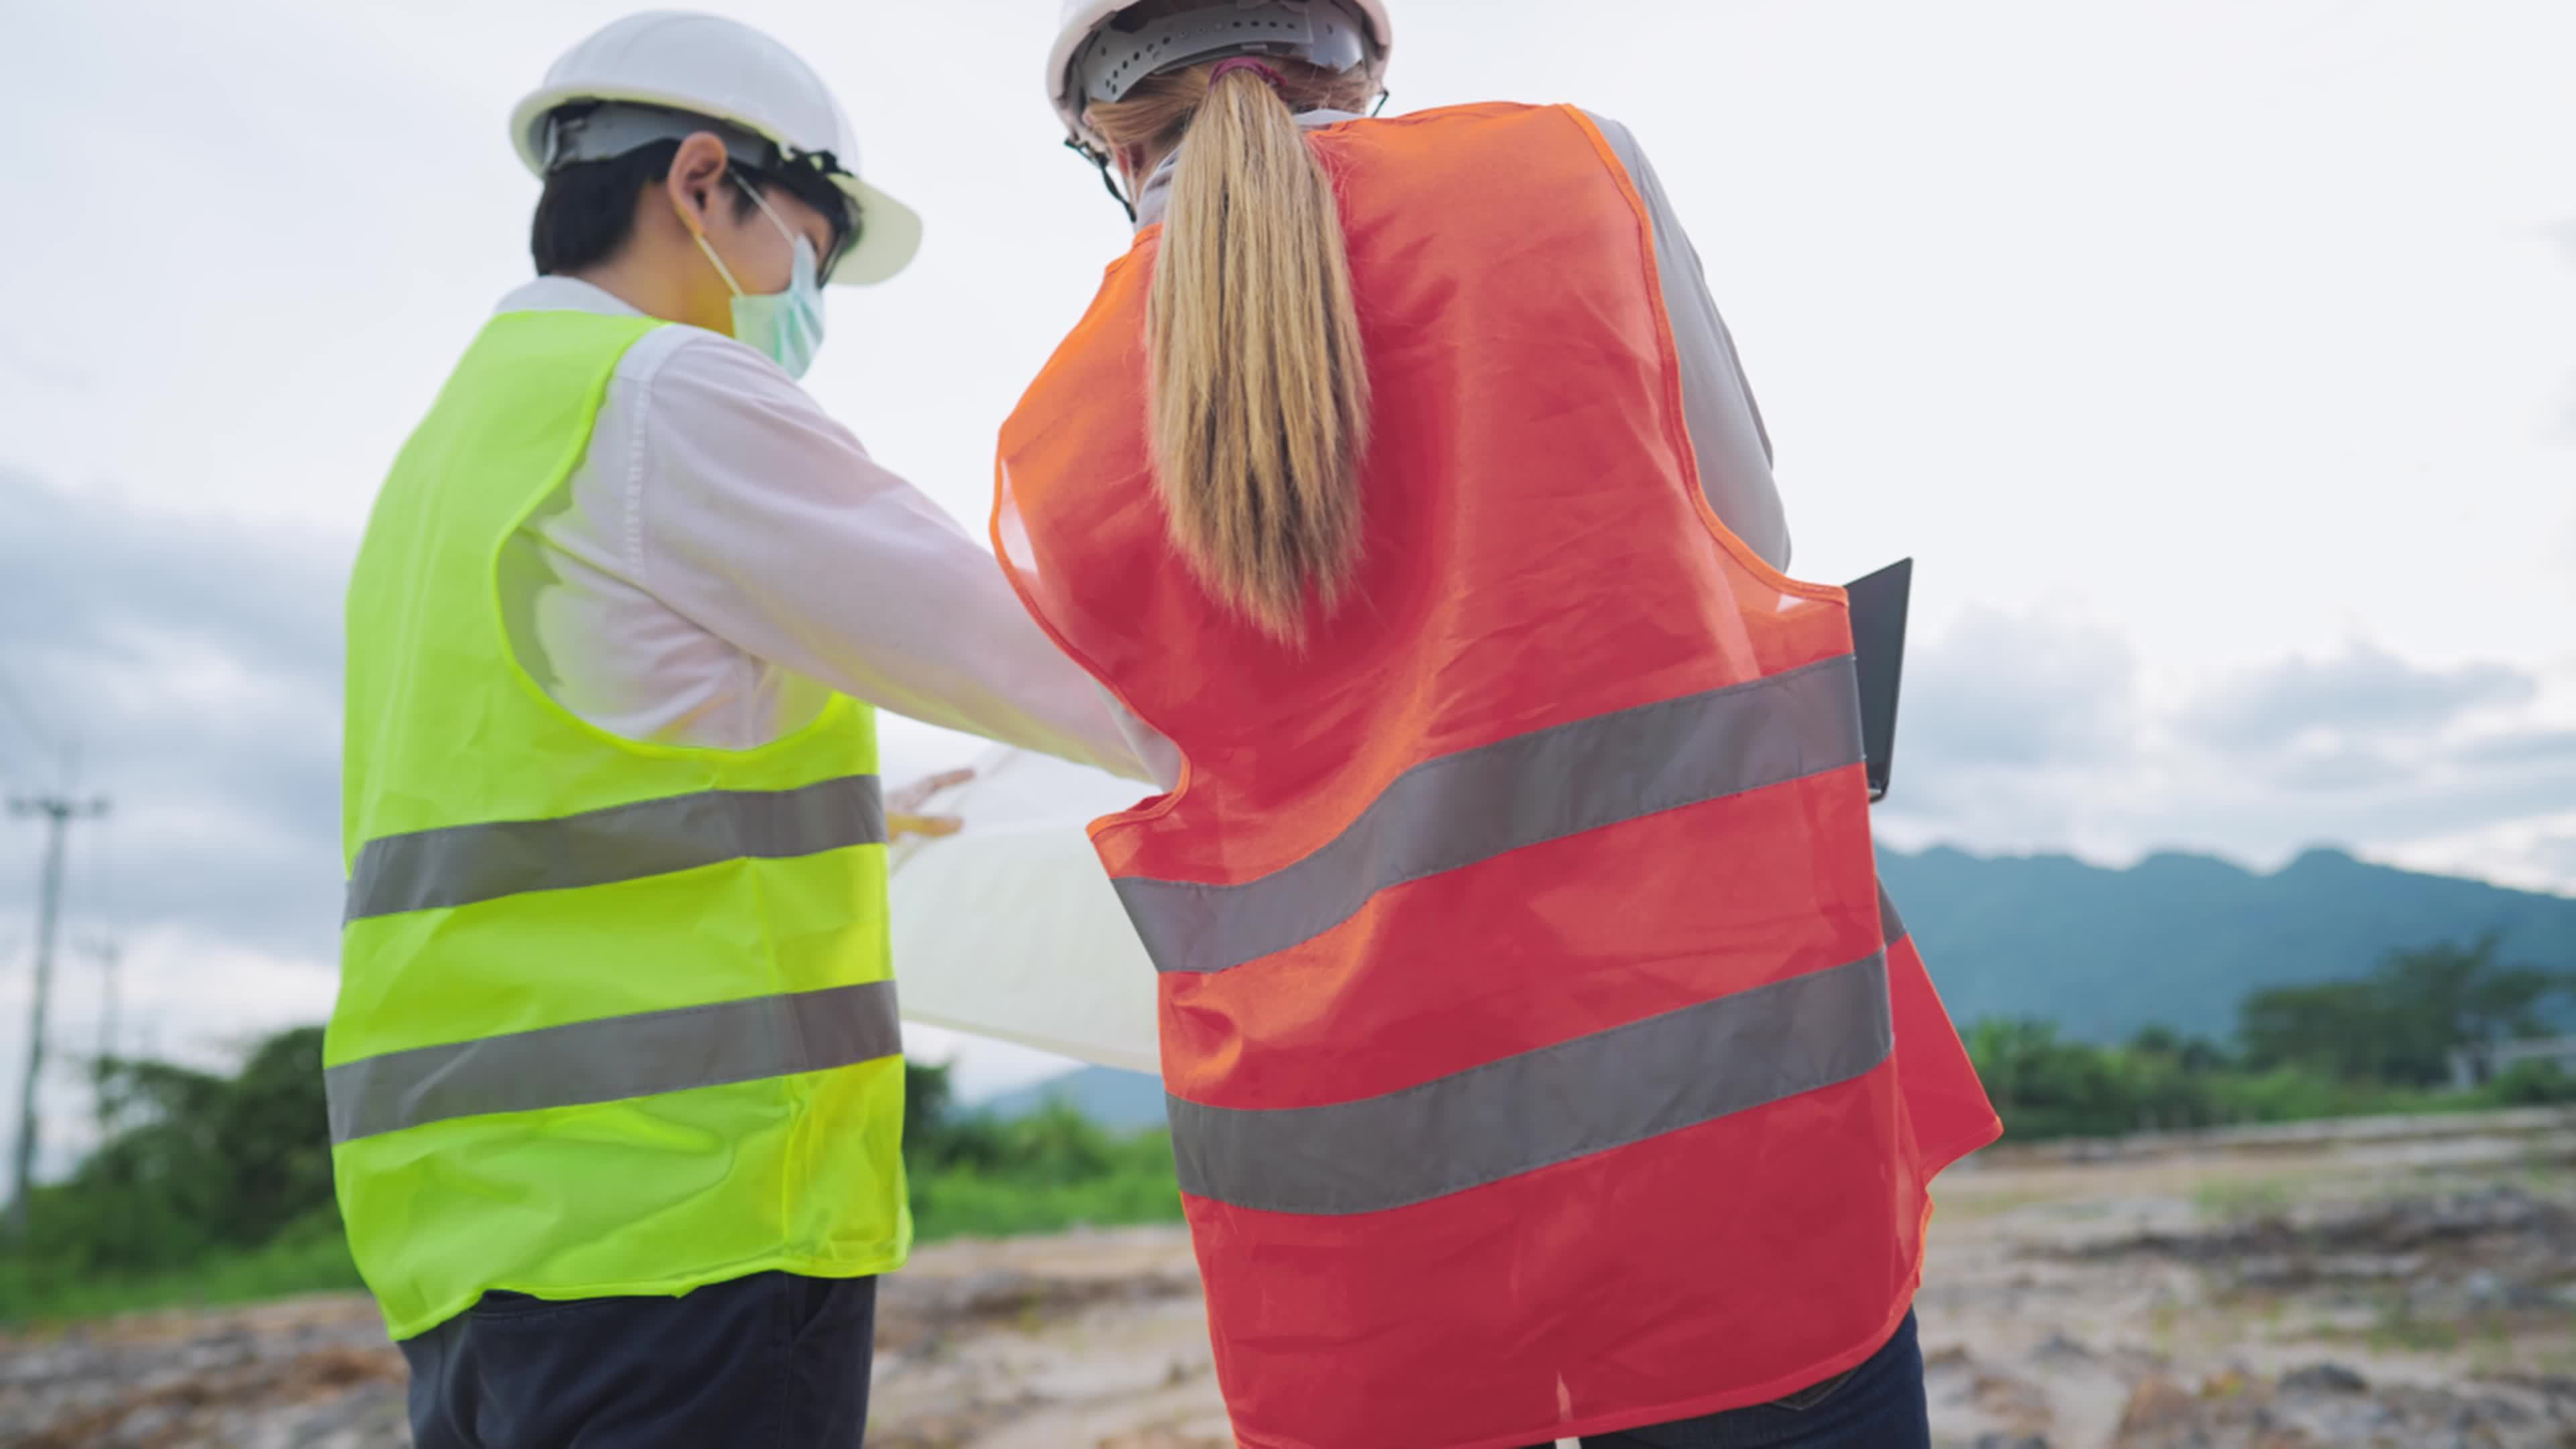 Safety First: Why High Visibility Safety Vests and Uniforms Are